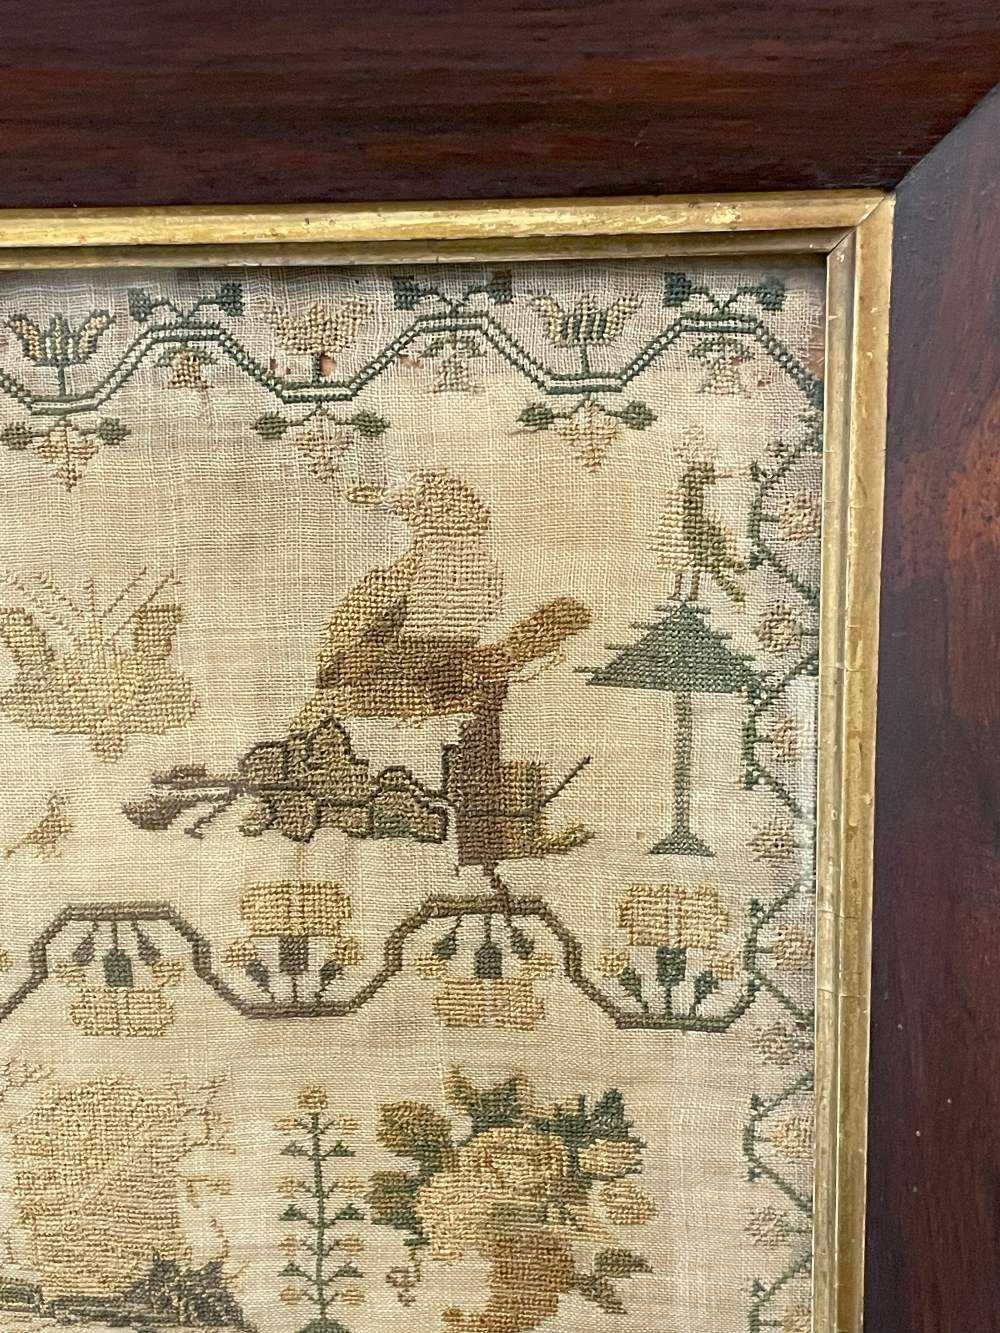 EARLY VICTORIAN NEEDLEWORK SAMPLER, by Susannah Terrington aged 10, dated 1842, decorated with - Image 7 of 15